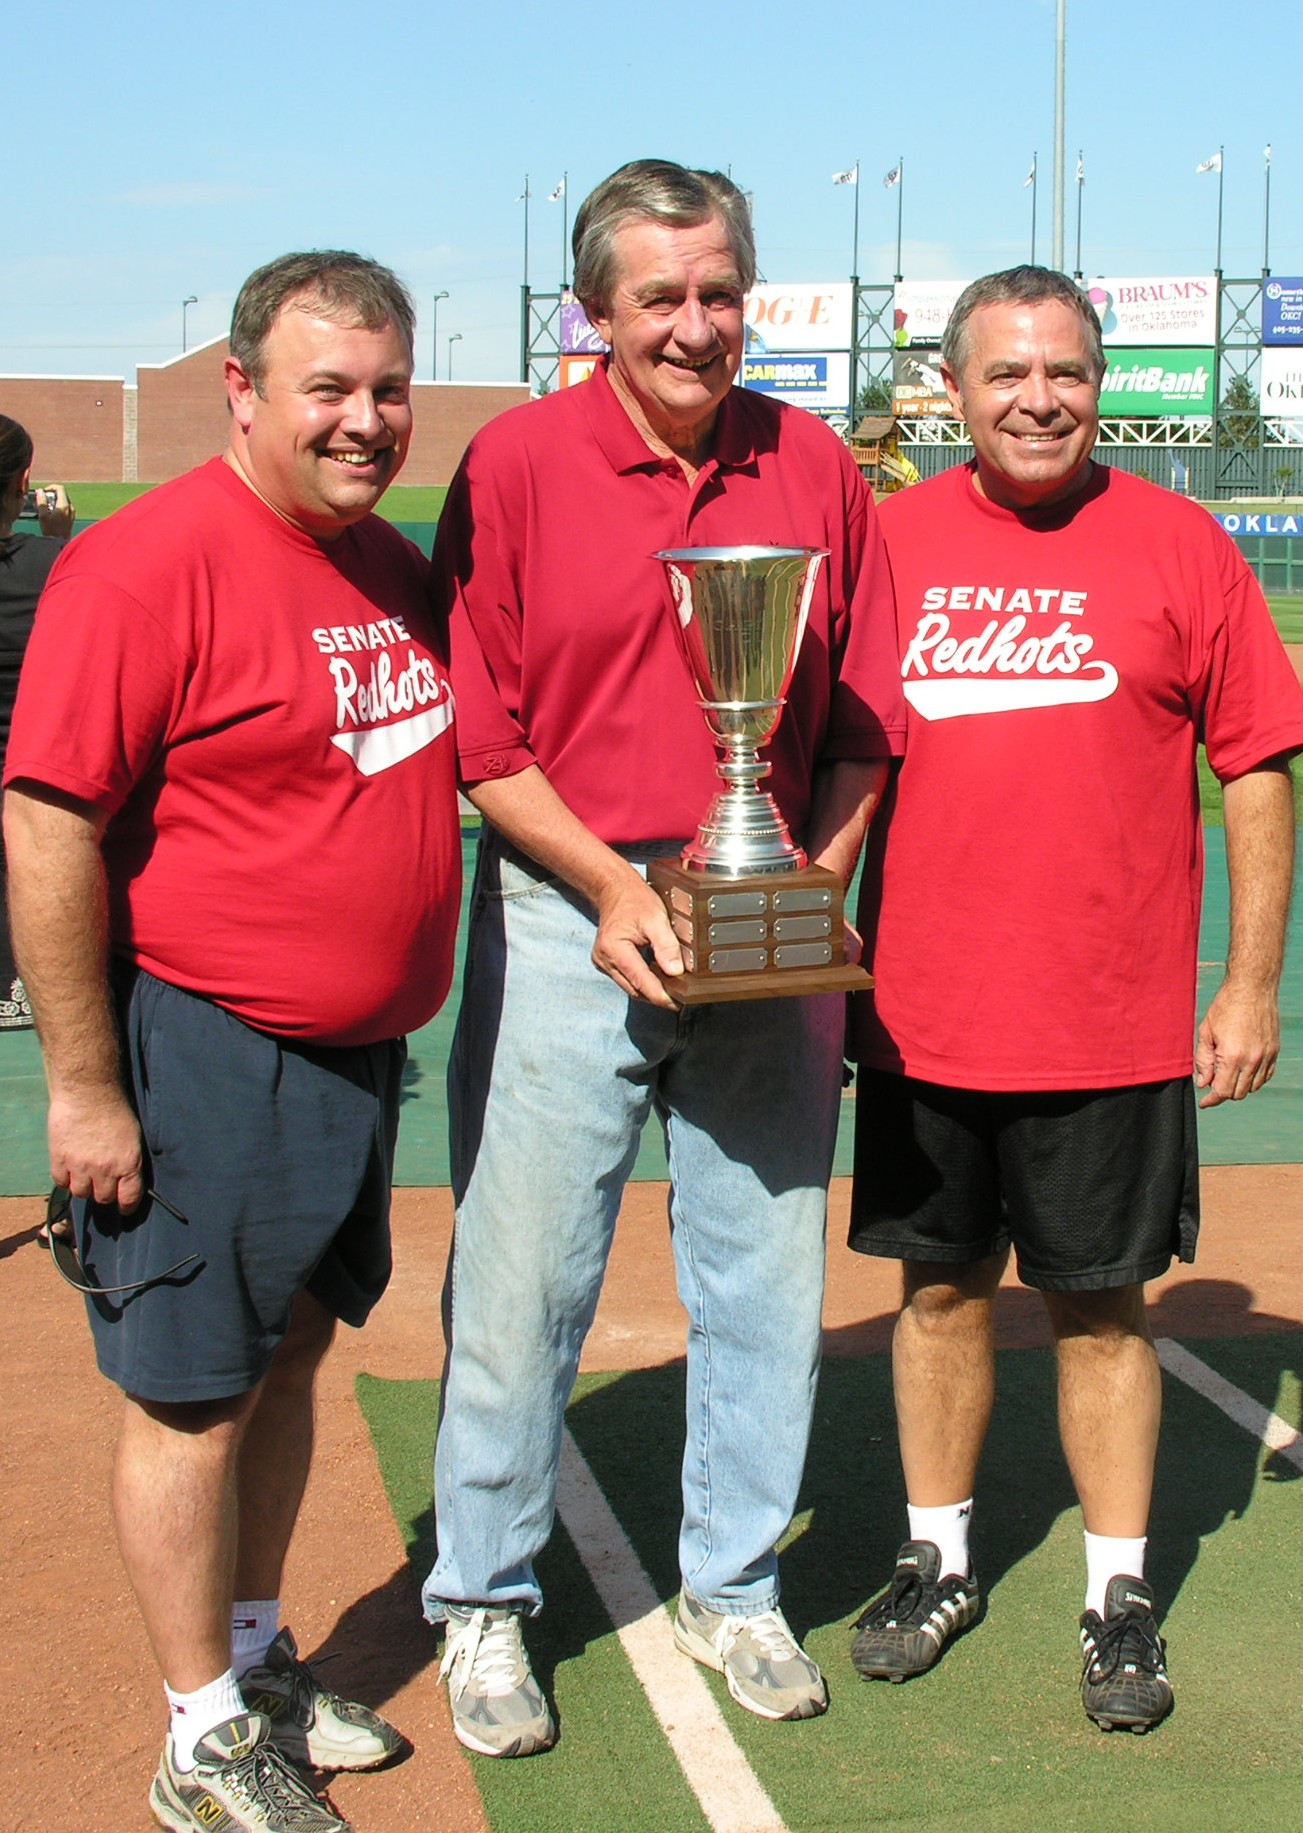 Senators Glenn Coffee, Ted Fisher and Mike Morgan are all smiles after the Senate Redhots enjoy their third straight win over the House at the Bricktown Ballpark.